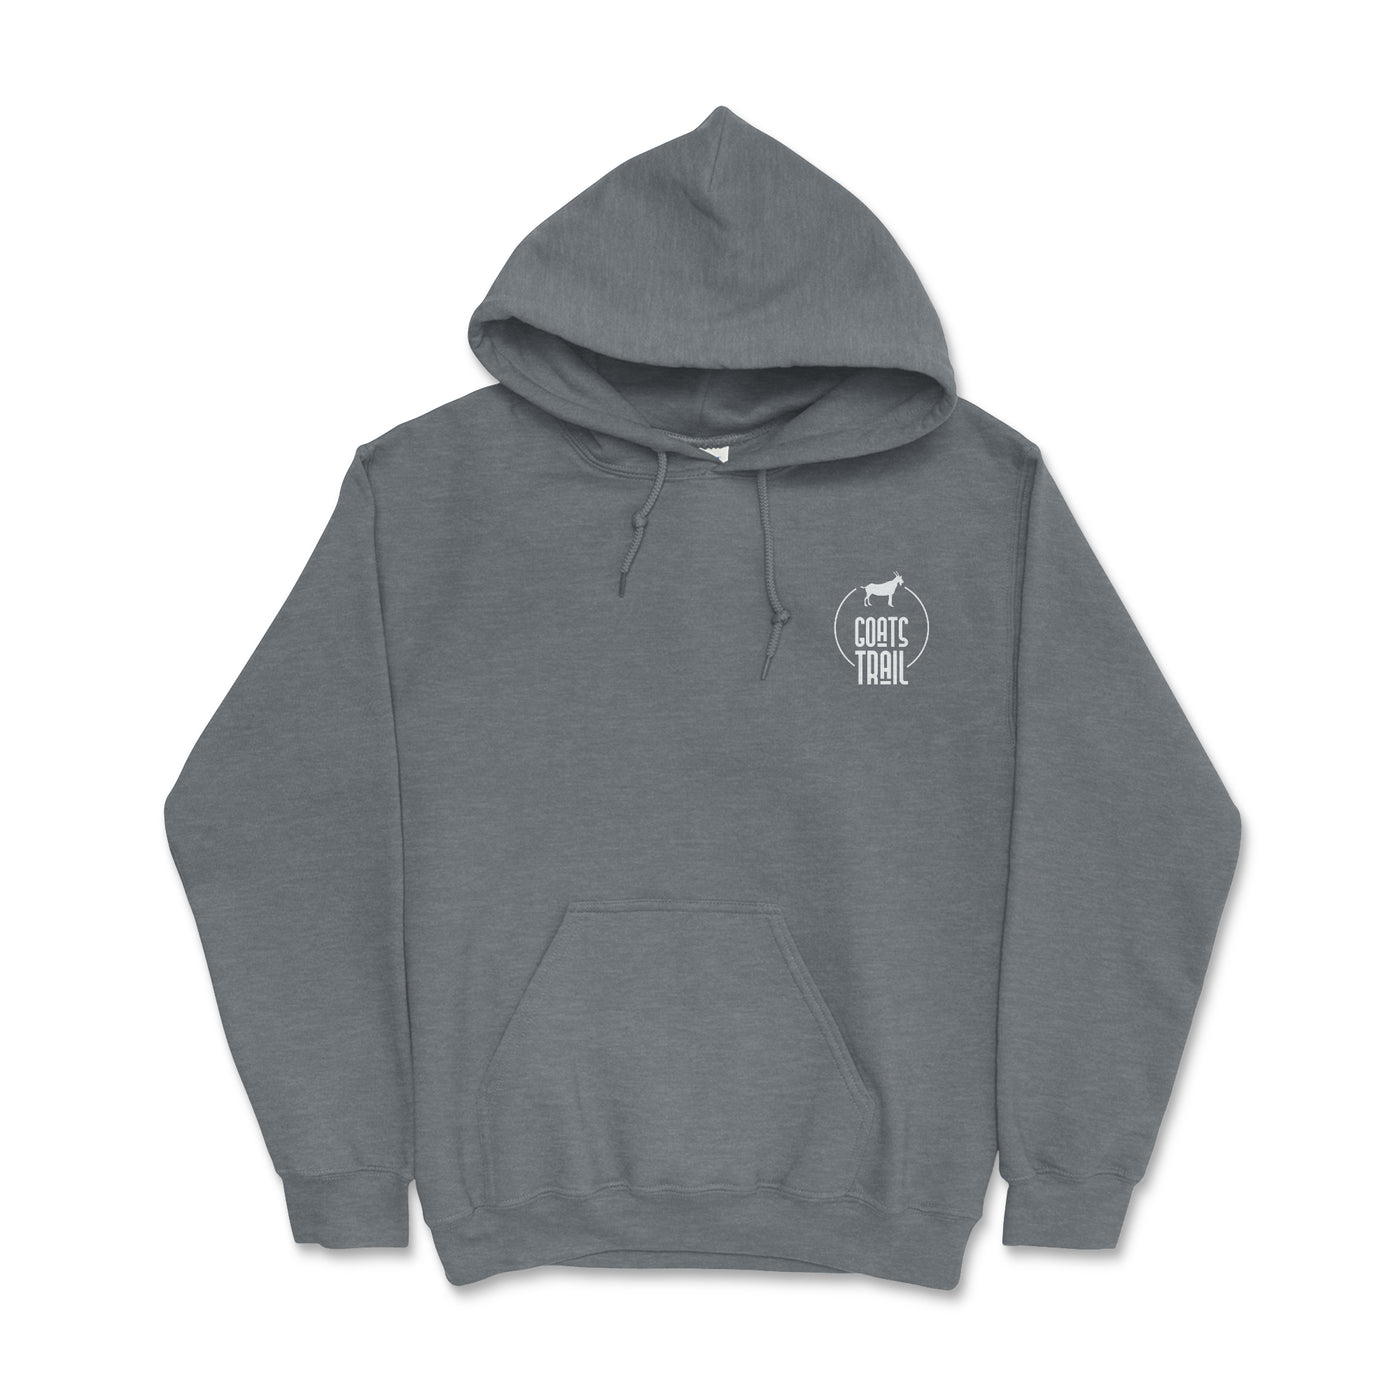 Hoodie - Goats Trail Off-Road Apparel Company